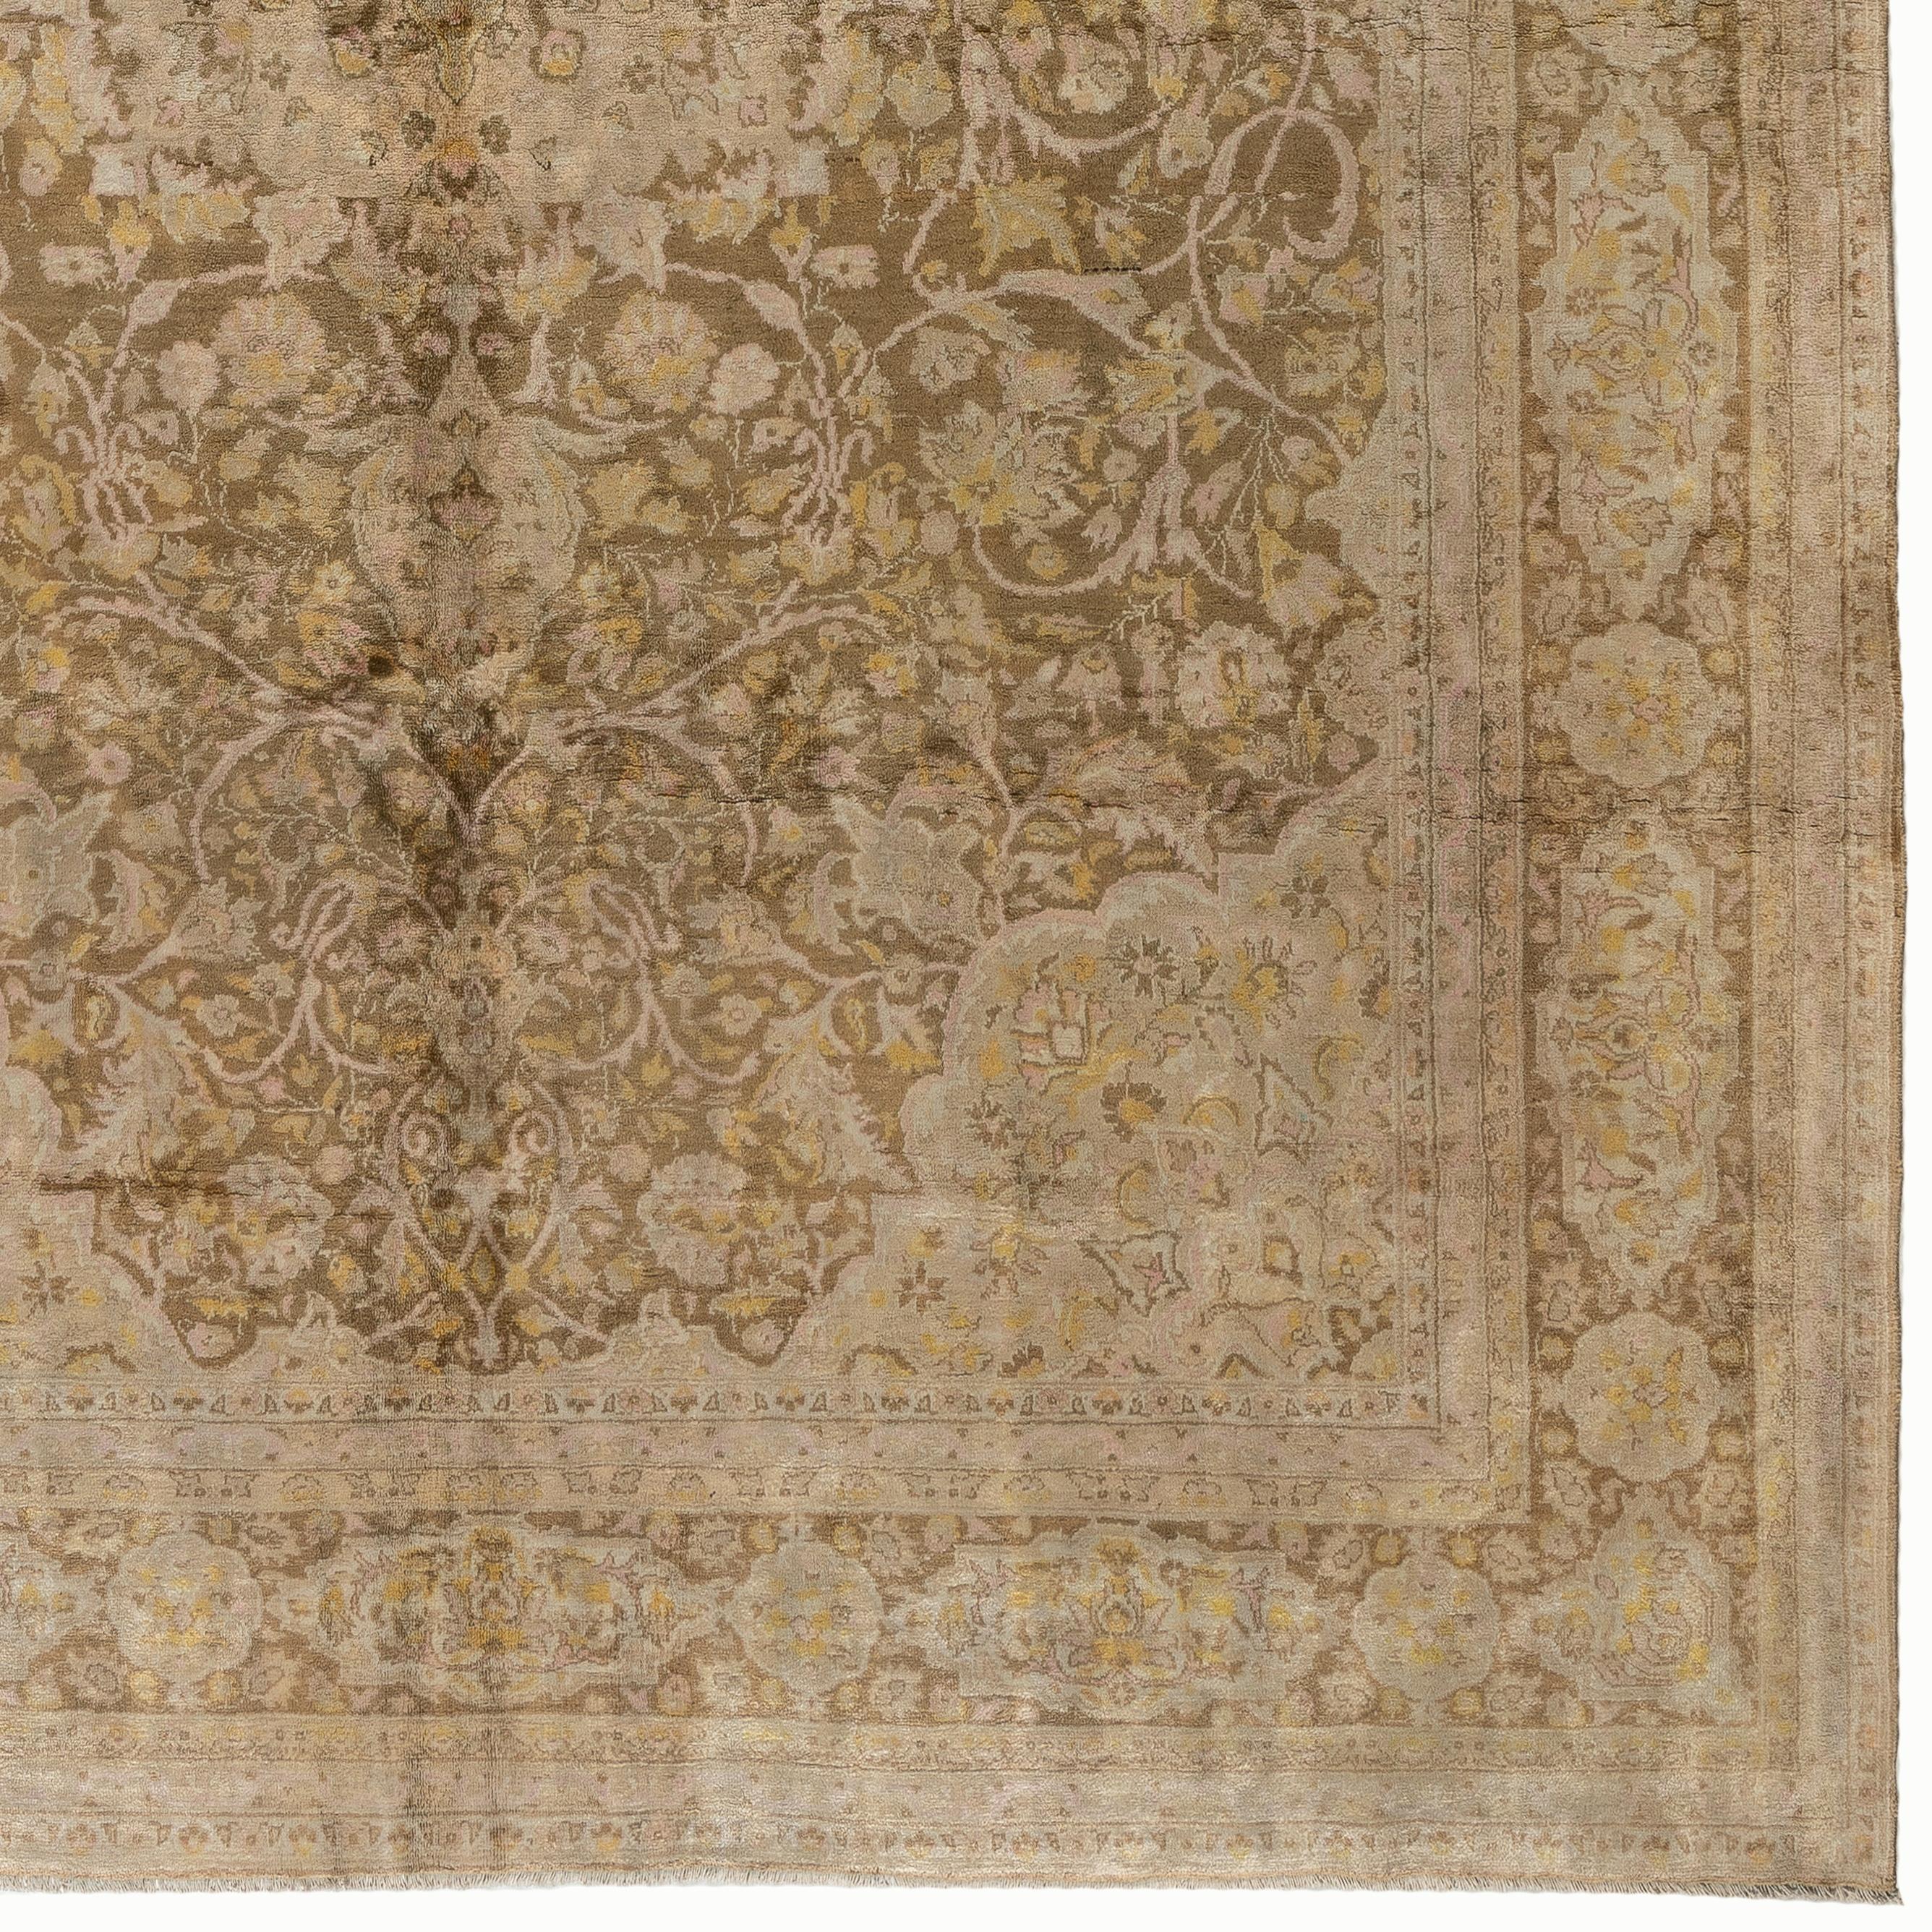 Hand-Knotted 8x10.6 Ft Semi Antique Turkish Sivas Rug in Soft Colors, Velvety Wool Pile For Sale